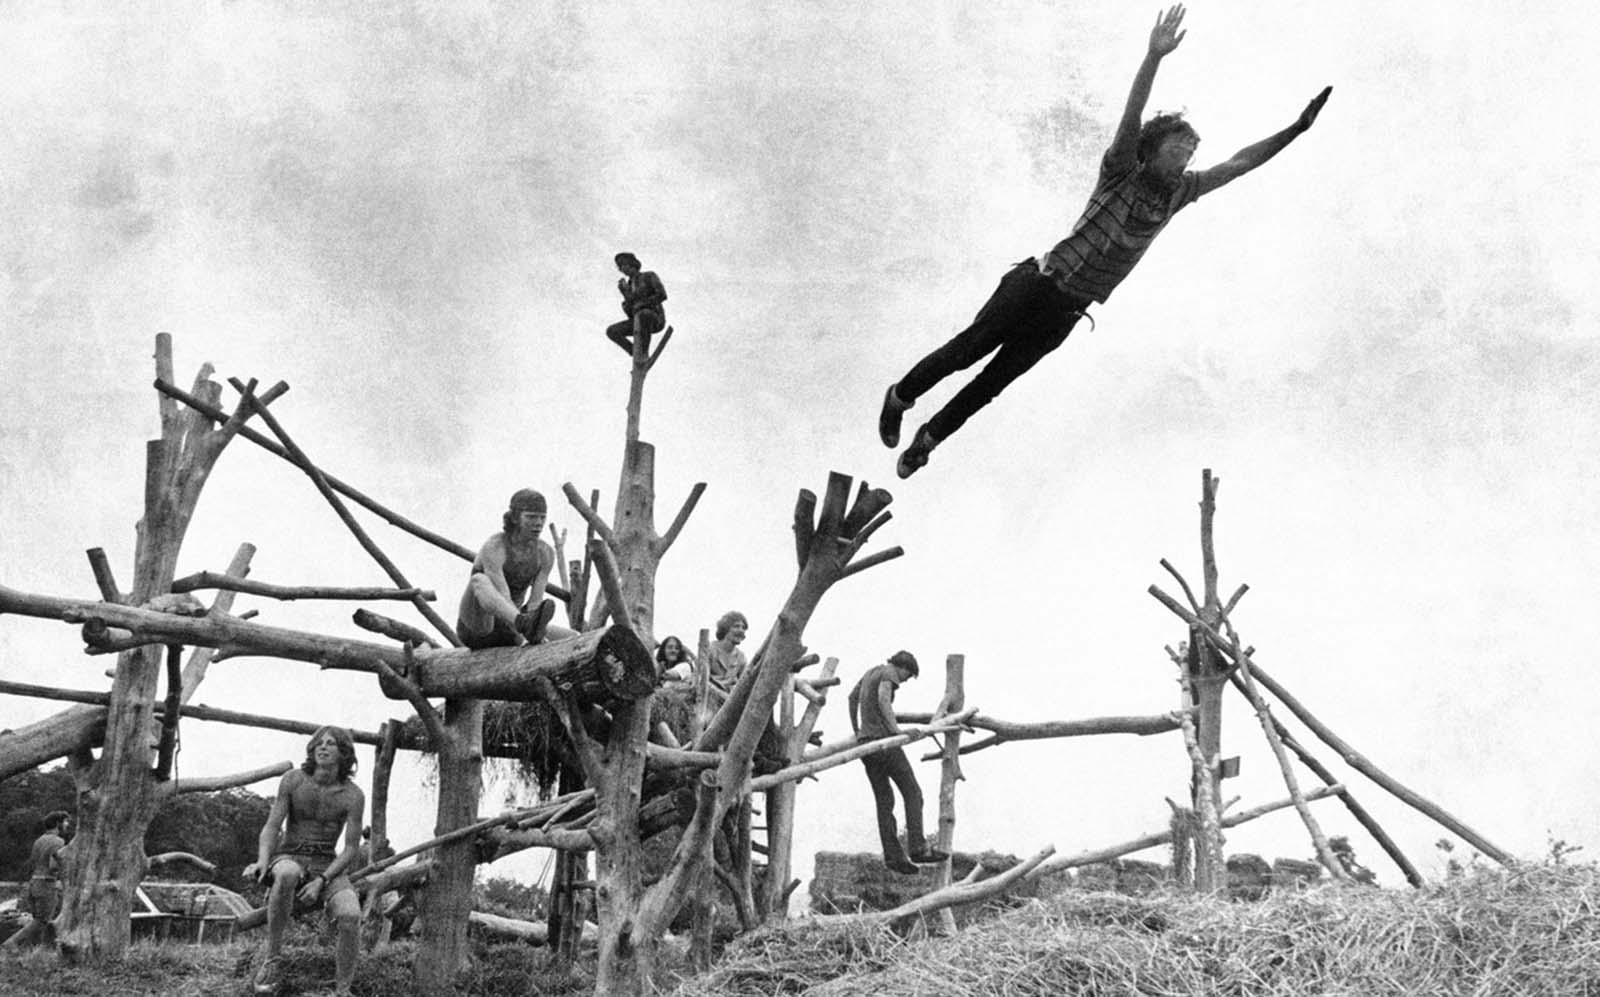 Rock-music fans sit on a tree sculpture as one leaps midair onto a pile of hay during Woodstock on August 15, 1969.